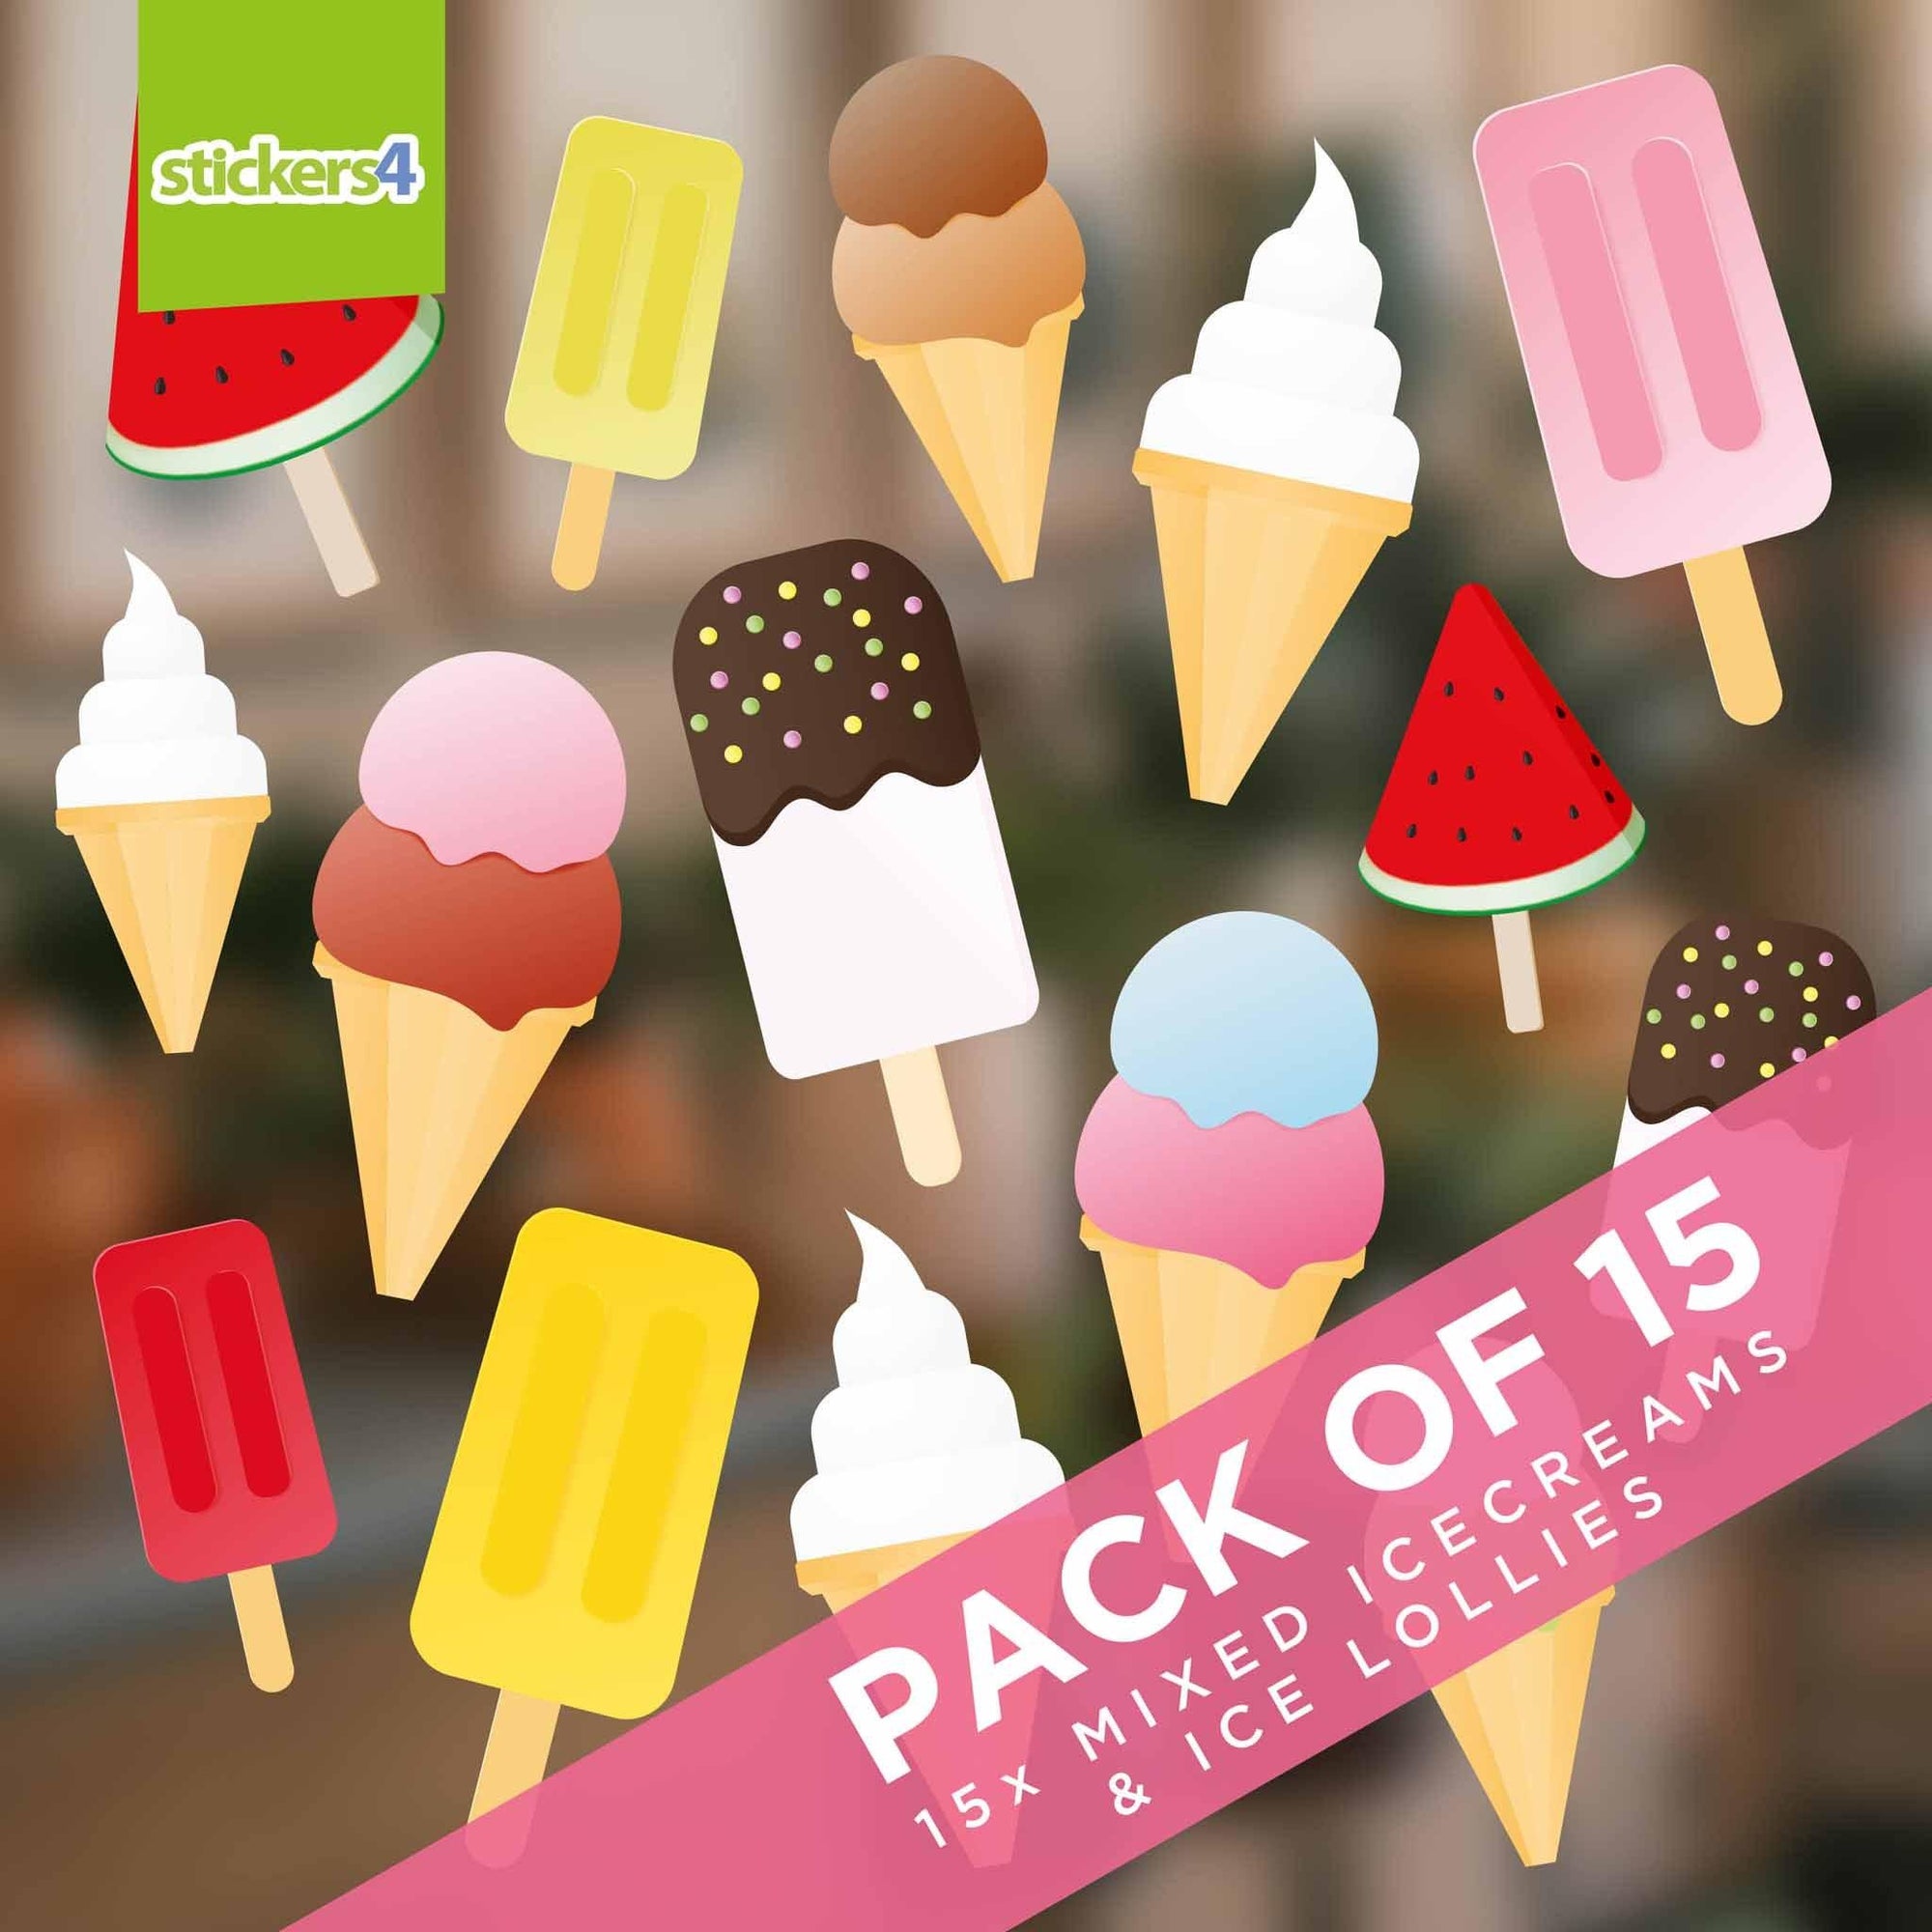 Pack of 15 Mixed Ice Lollies Summer Window Display